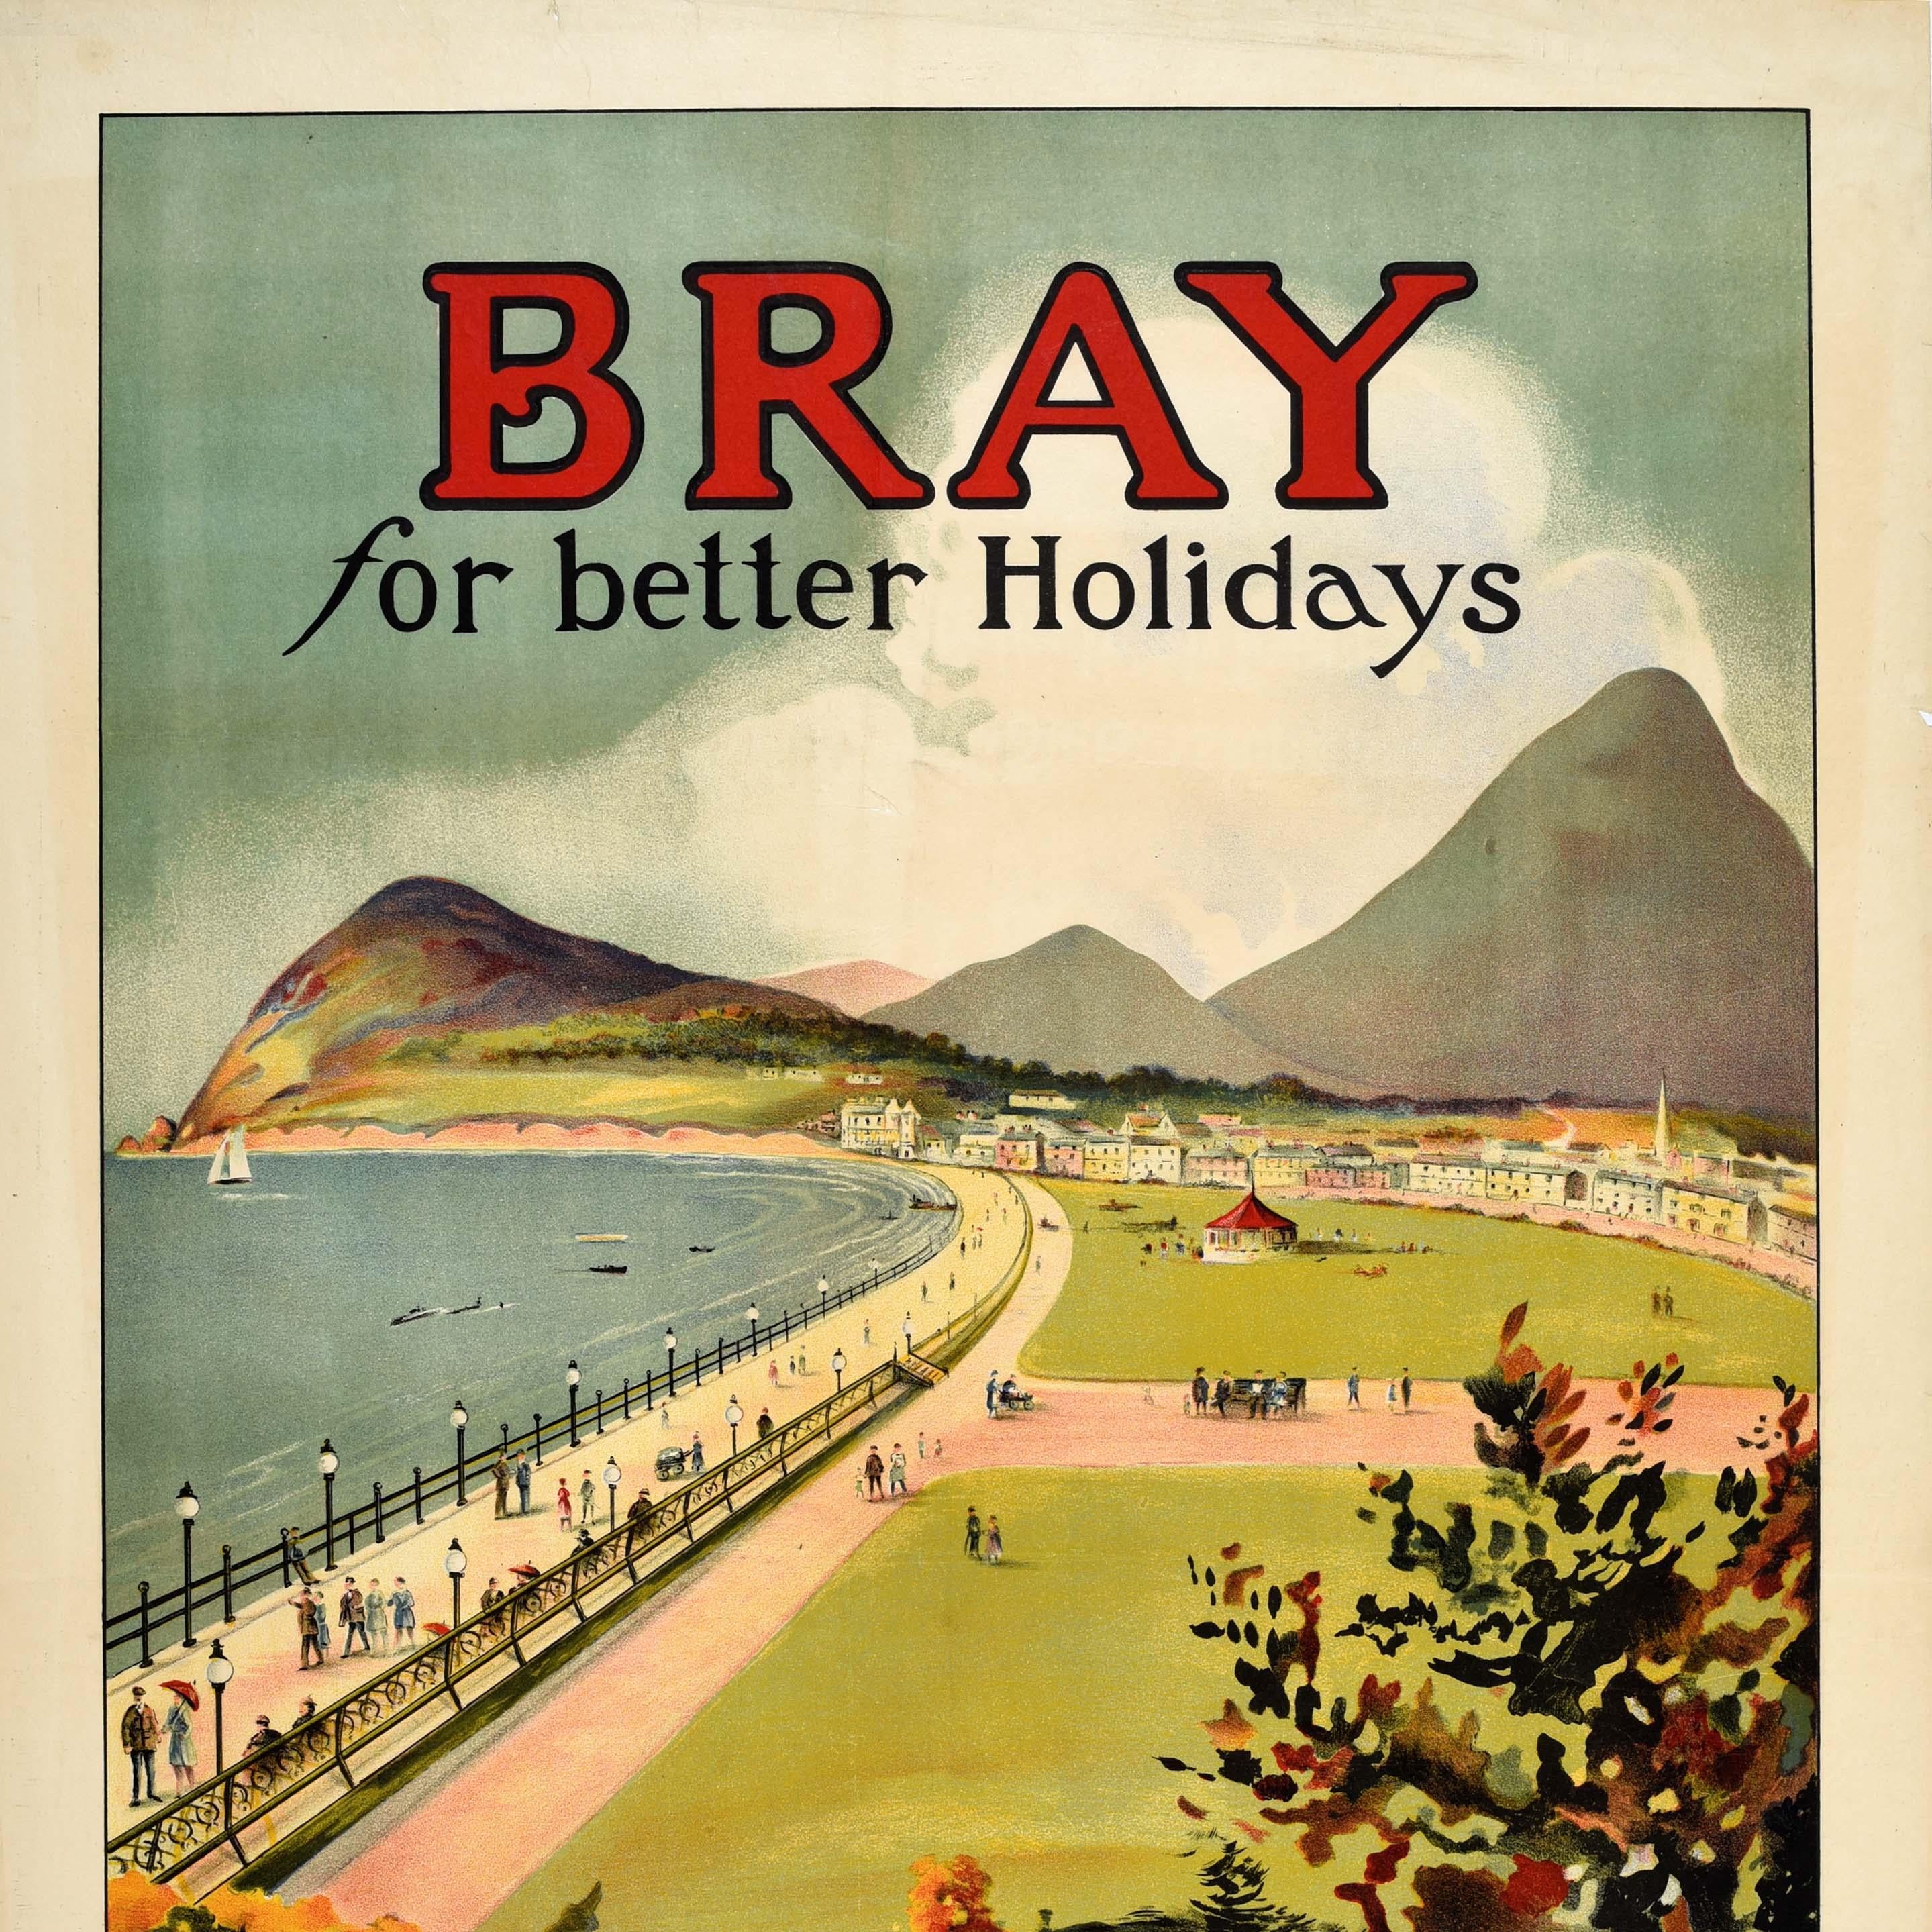 Original Vintage Train Travel Poster Bray County Wicklow Ireland Better Holidays - Beige Print by Unknown